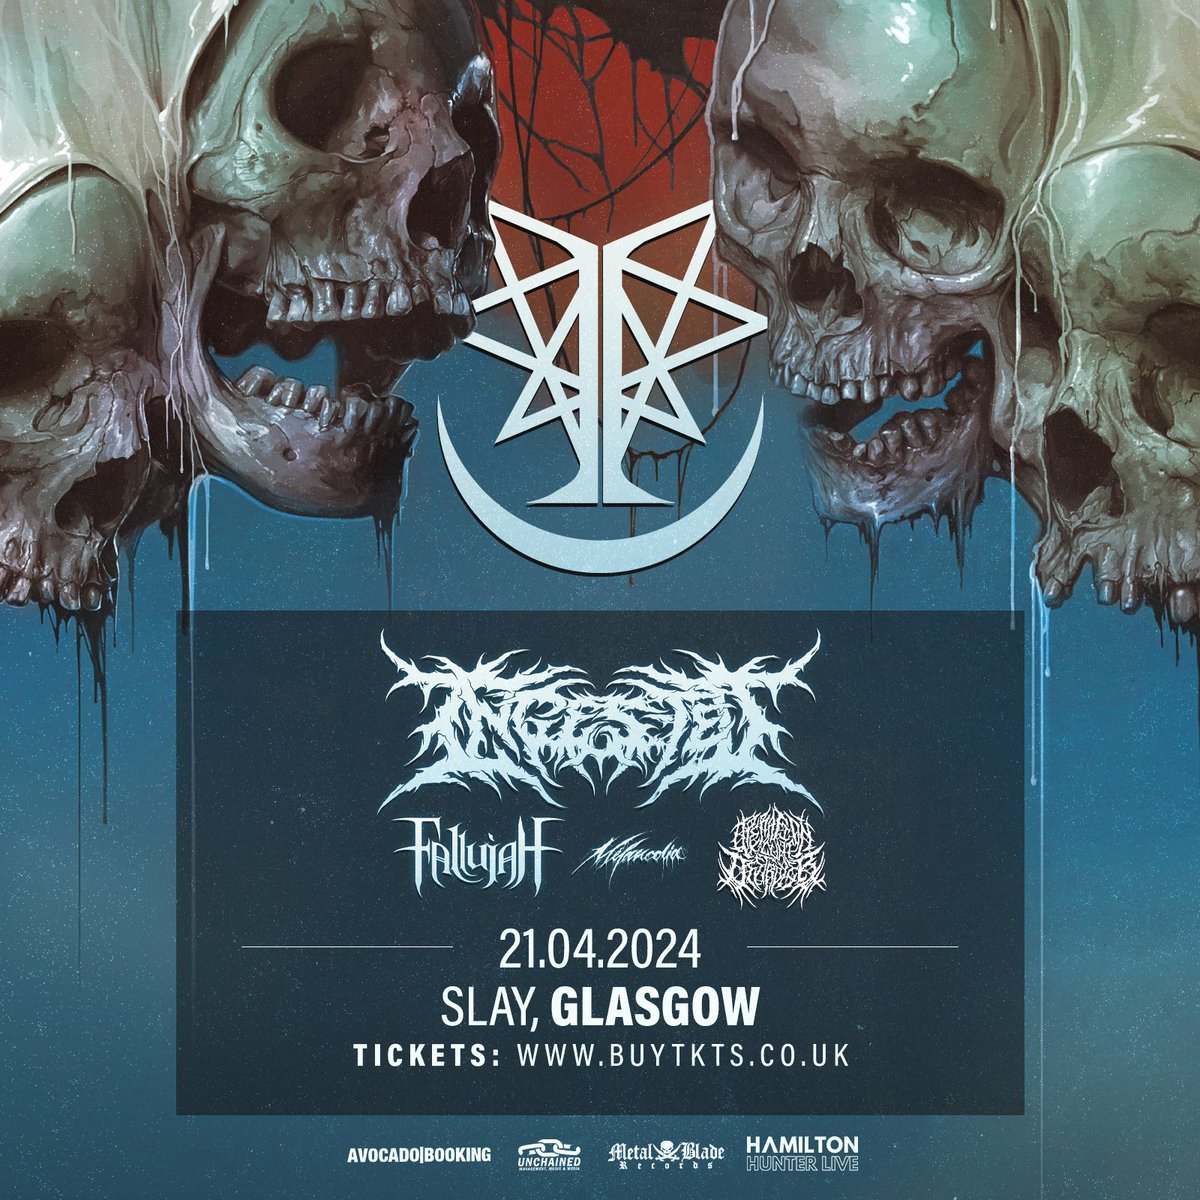 🚨𝗦𝗨𝗣𝗣𝗢𝗥𝗧 𝗔𝗡𝗡𝗢𝗨𝗡𝗖𝗘𝗠𝗘𝗡𝗧 -> Glasgow slam death metallers, Operation Cunt Destroyer replace Vulvodynia as support for @INGESTED headline show on 21st April. Vulvodynia can no longer play due to UK VISA delays. @scottishmetal @ticketsscotland @whatsonglasgow